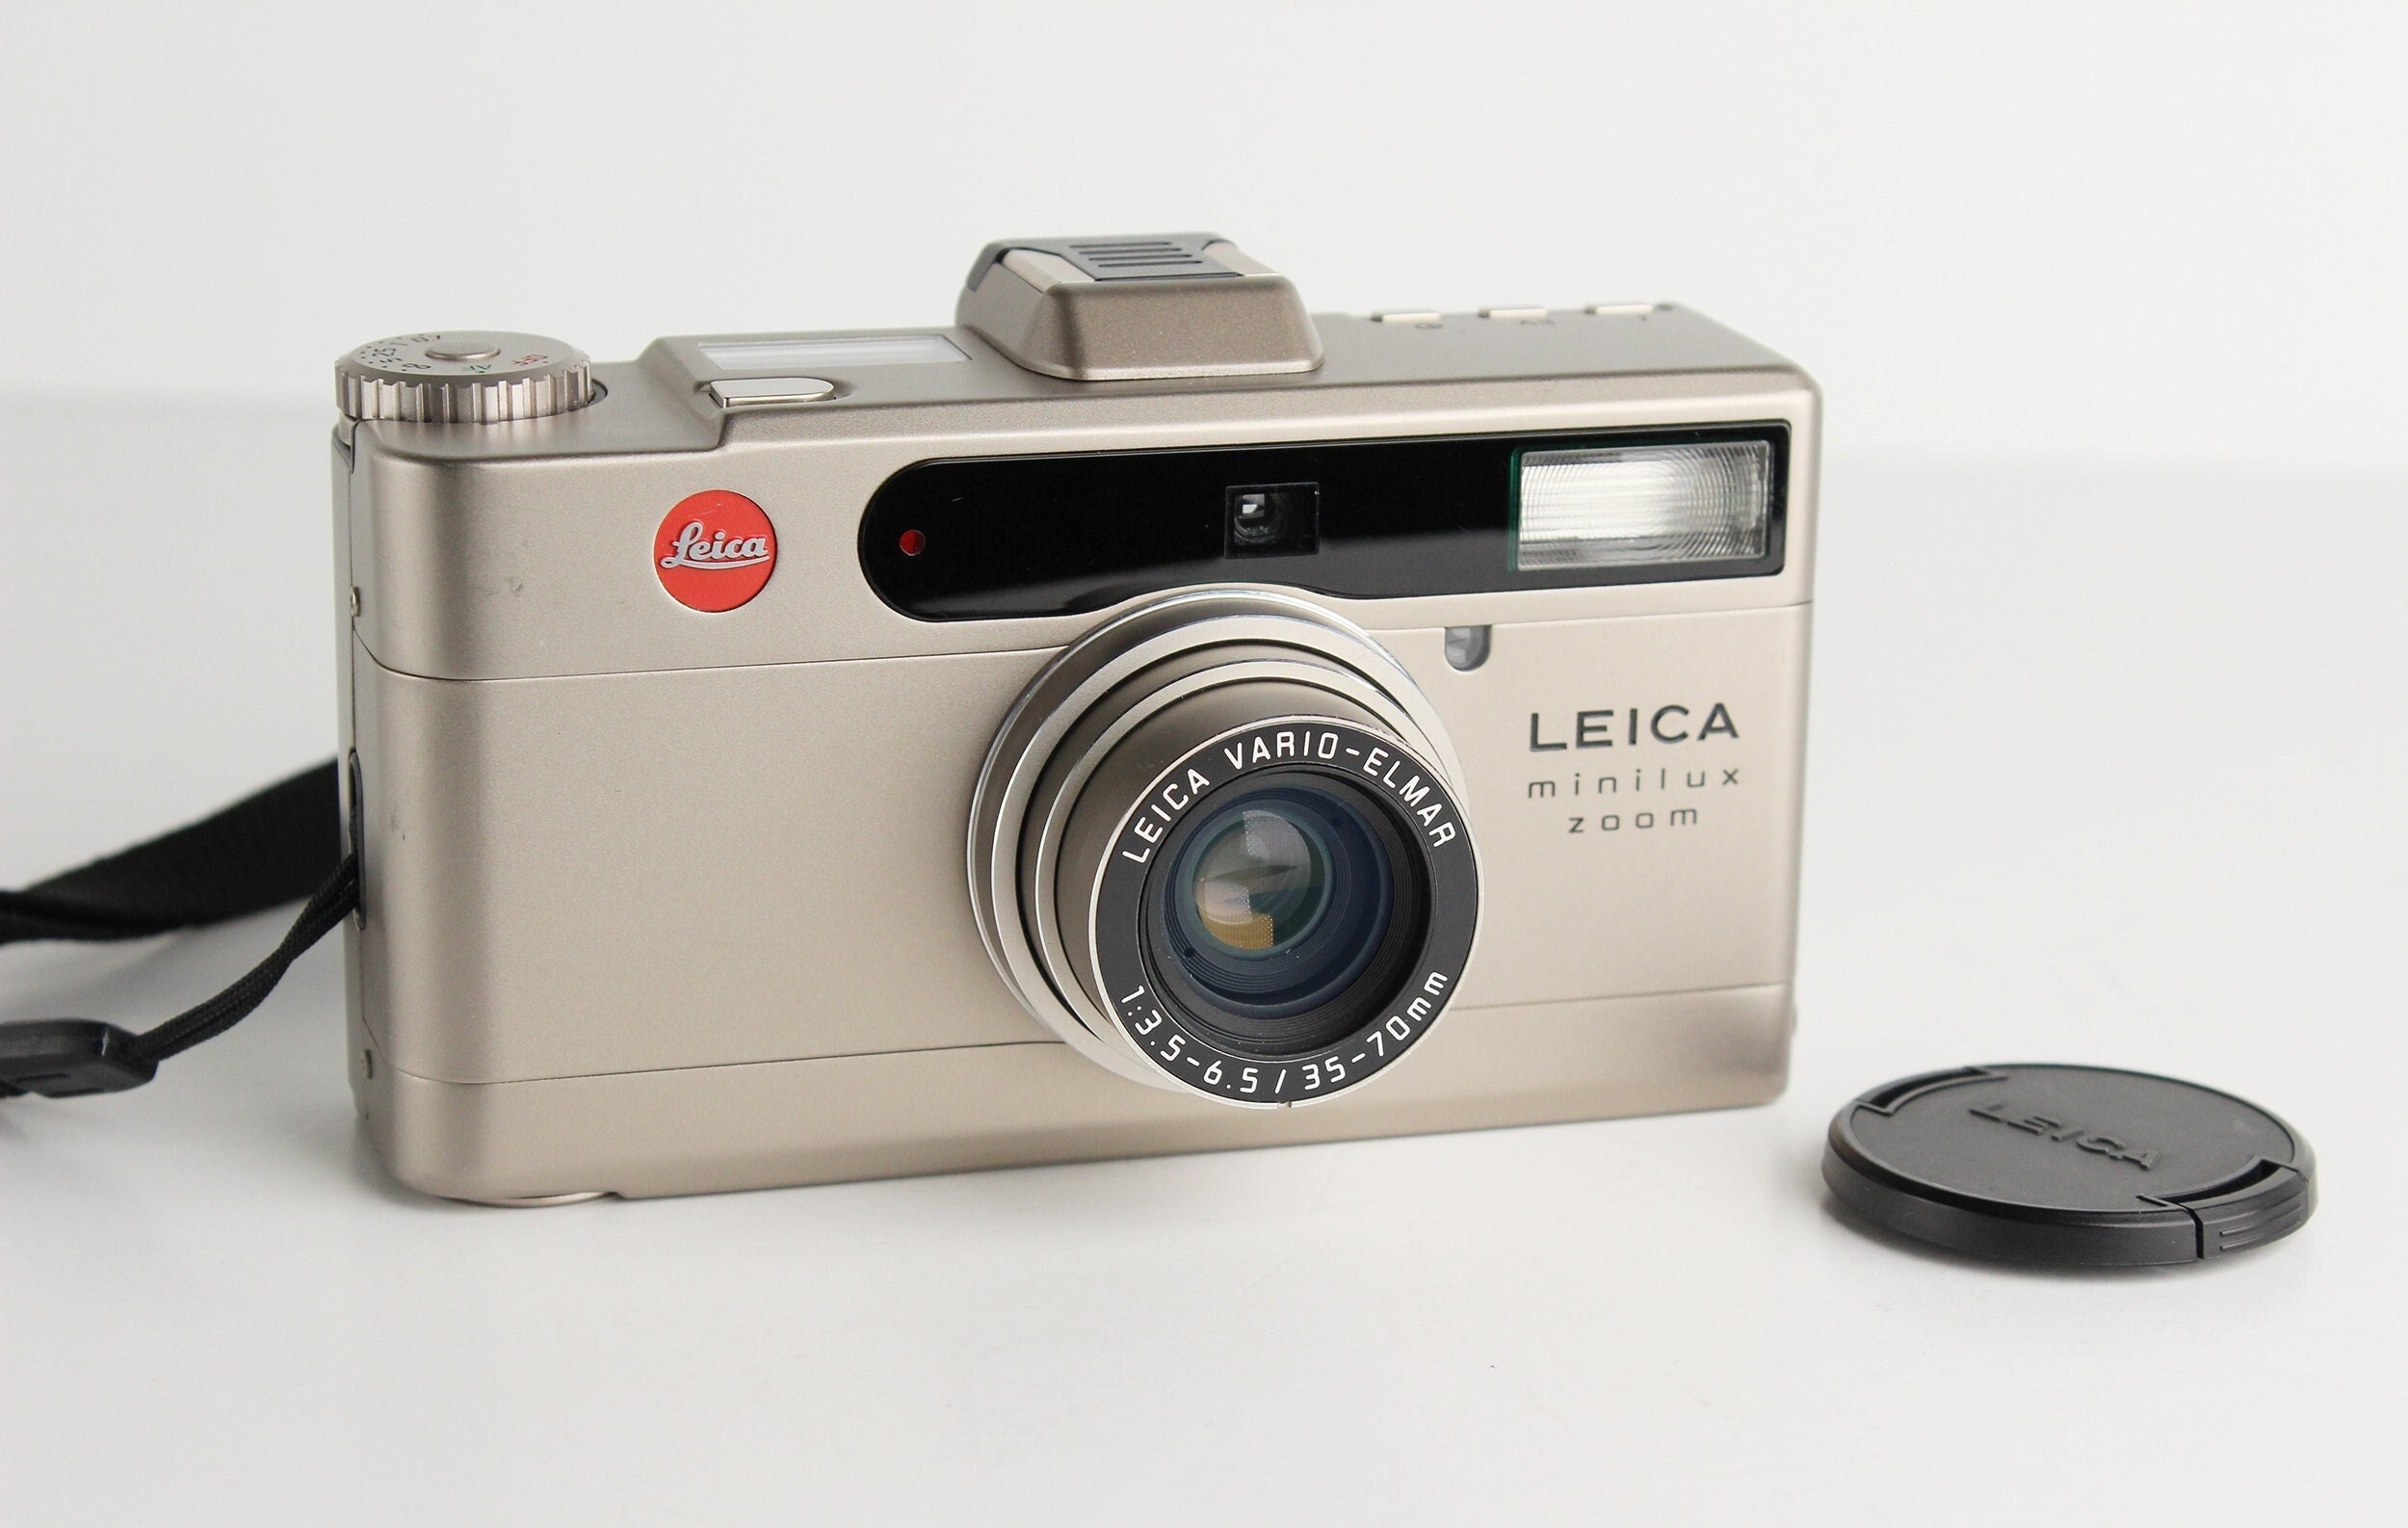 LEICA MINILUX ZOOM 35mm Point&Shoot Film Camera with Leica - Etsy 日本